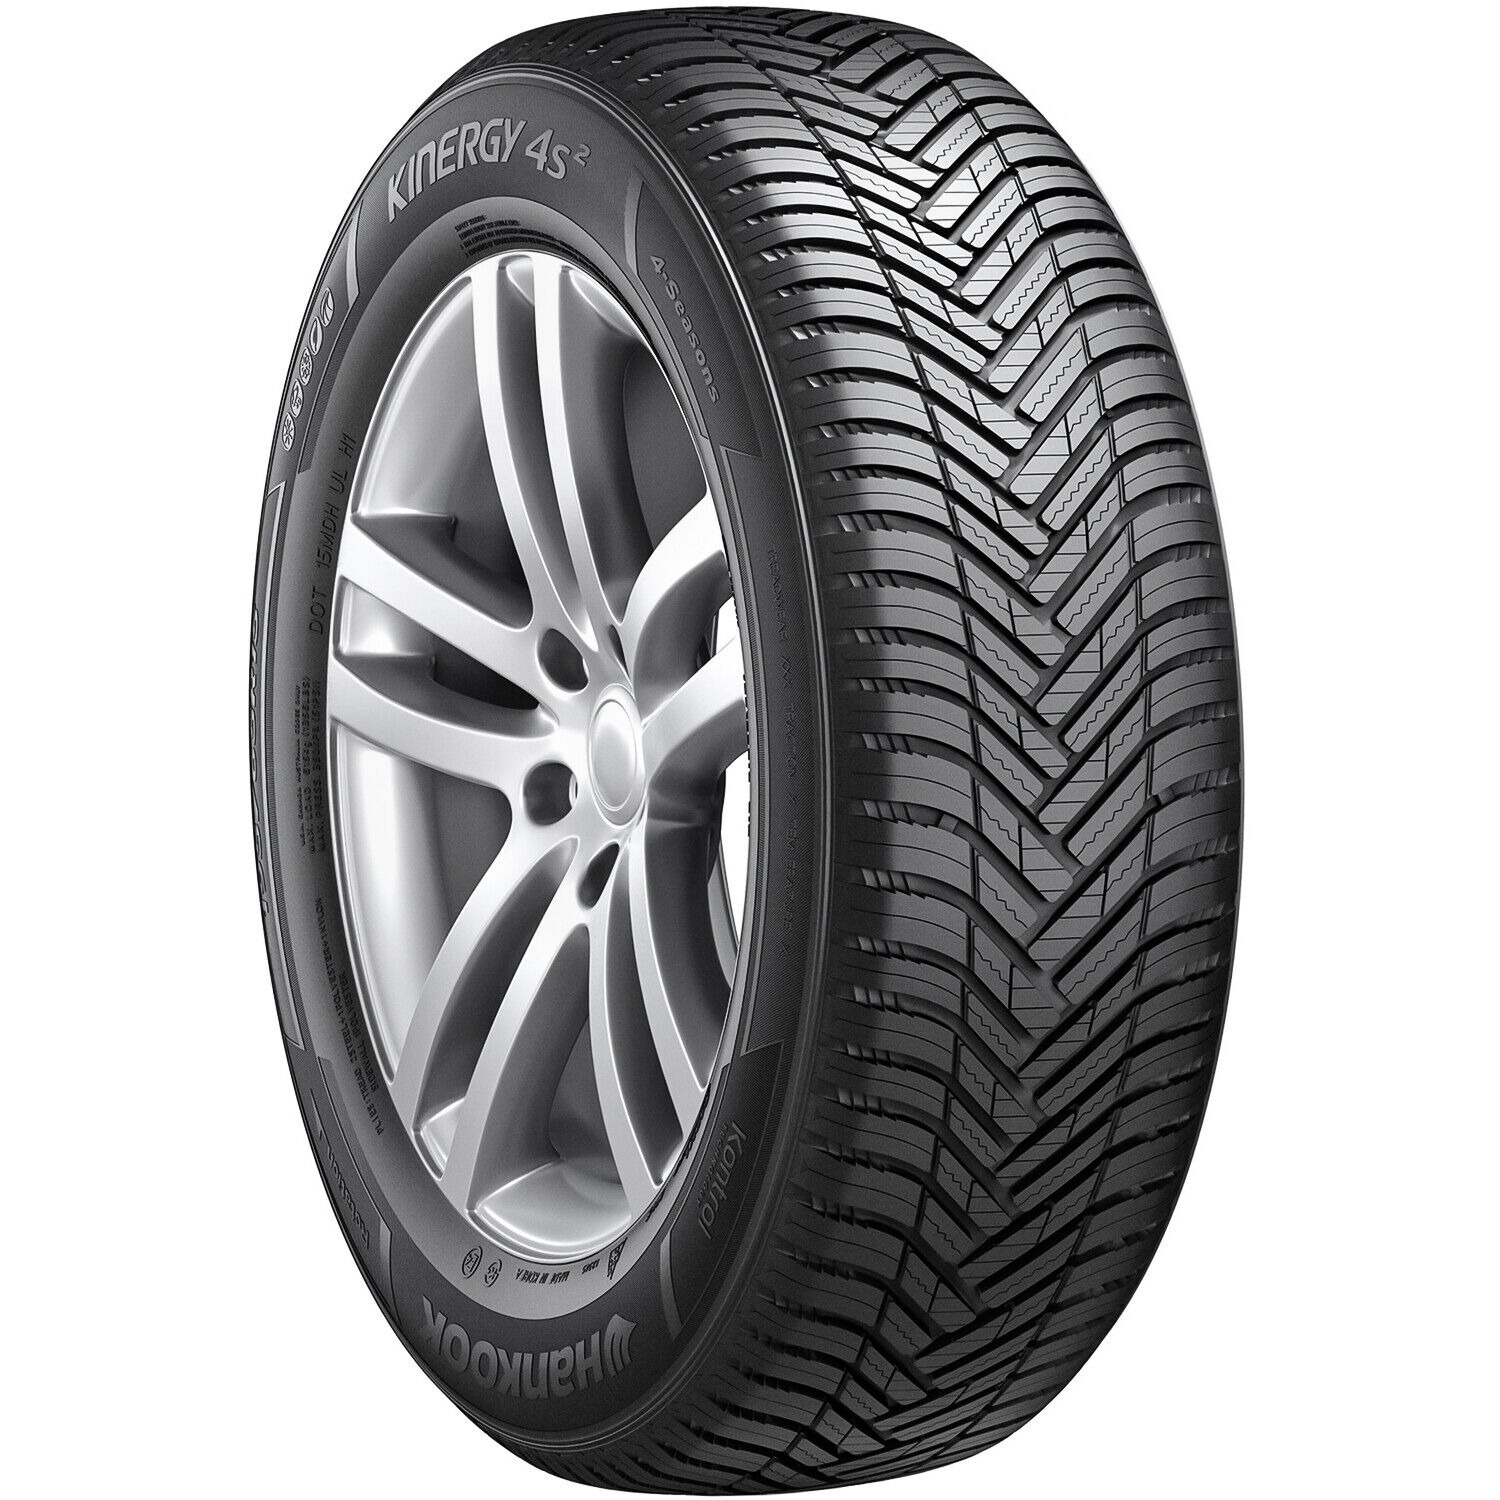 2 Tires Hankook Kinergy 4S2 195/65R15 91H All Weather